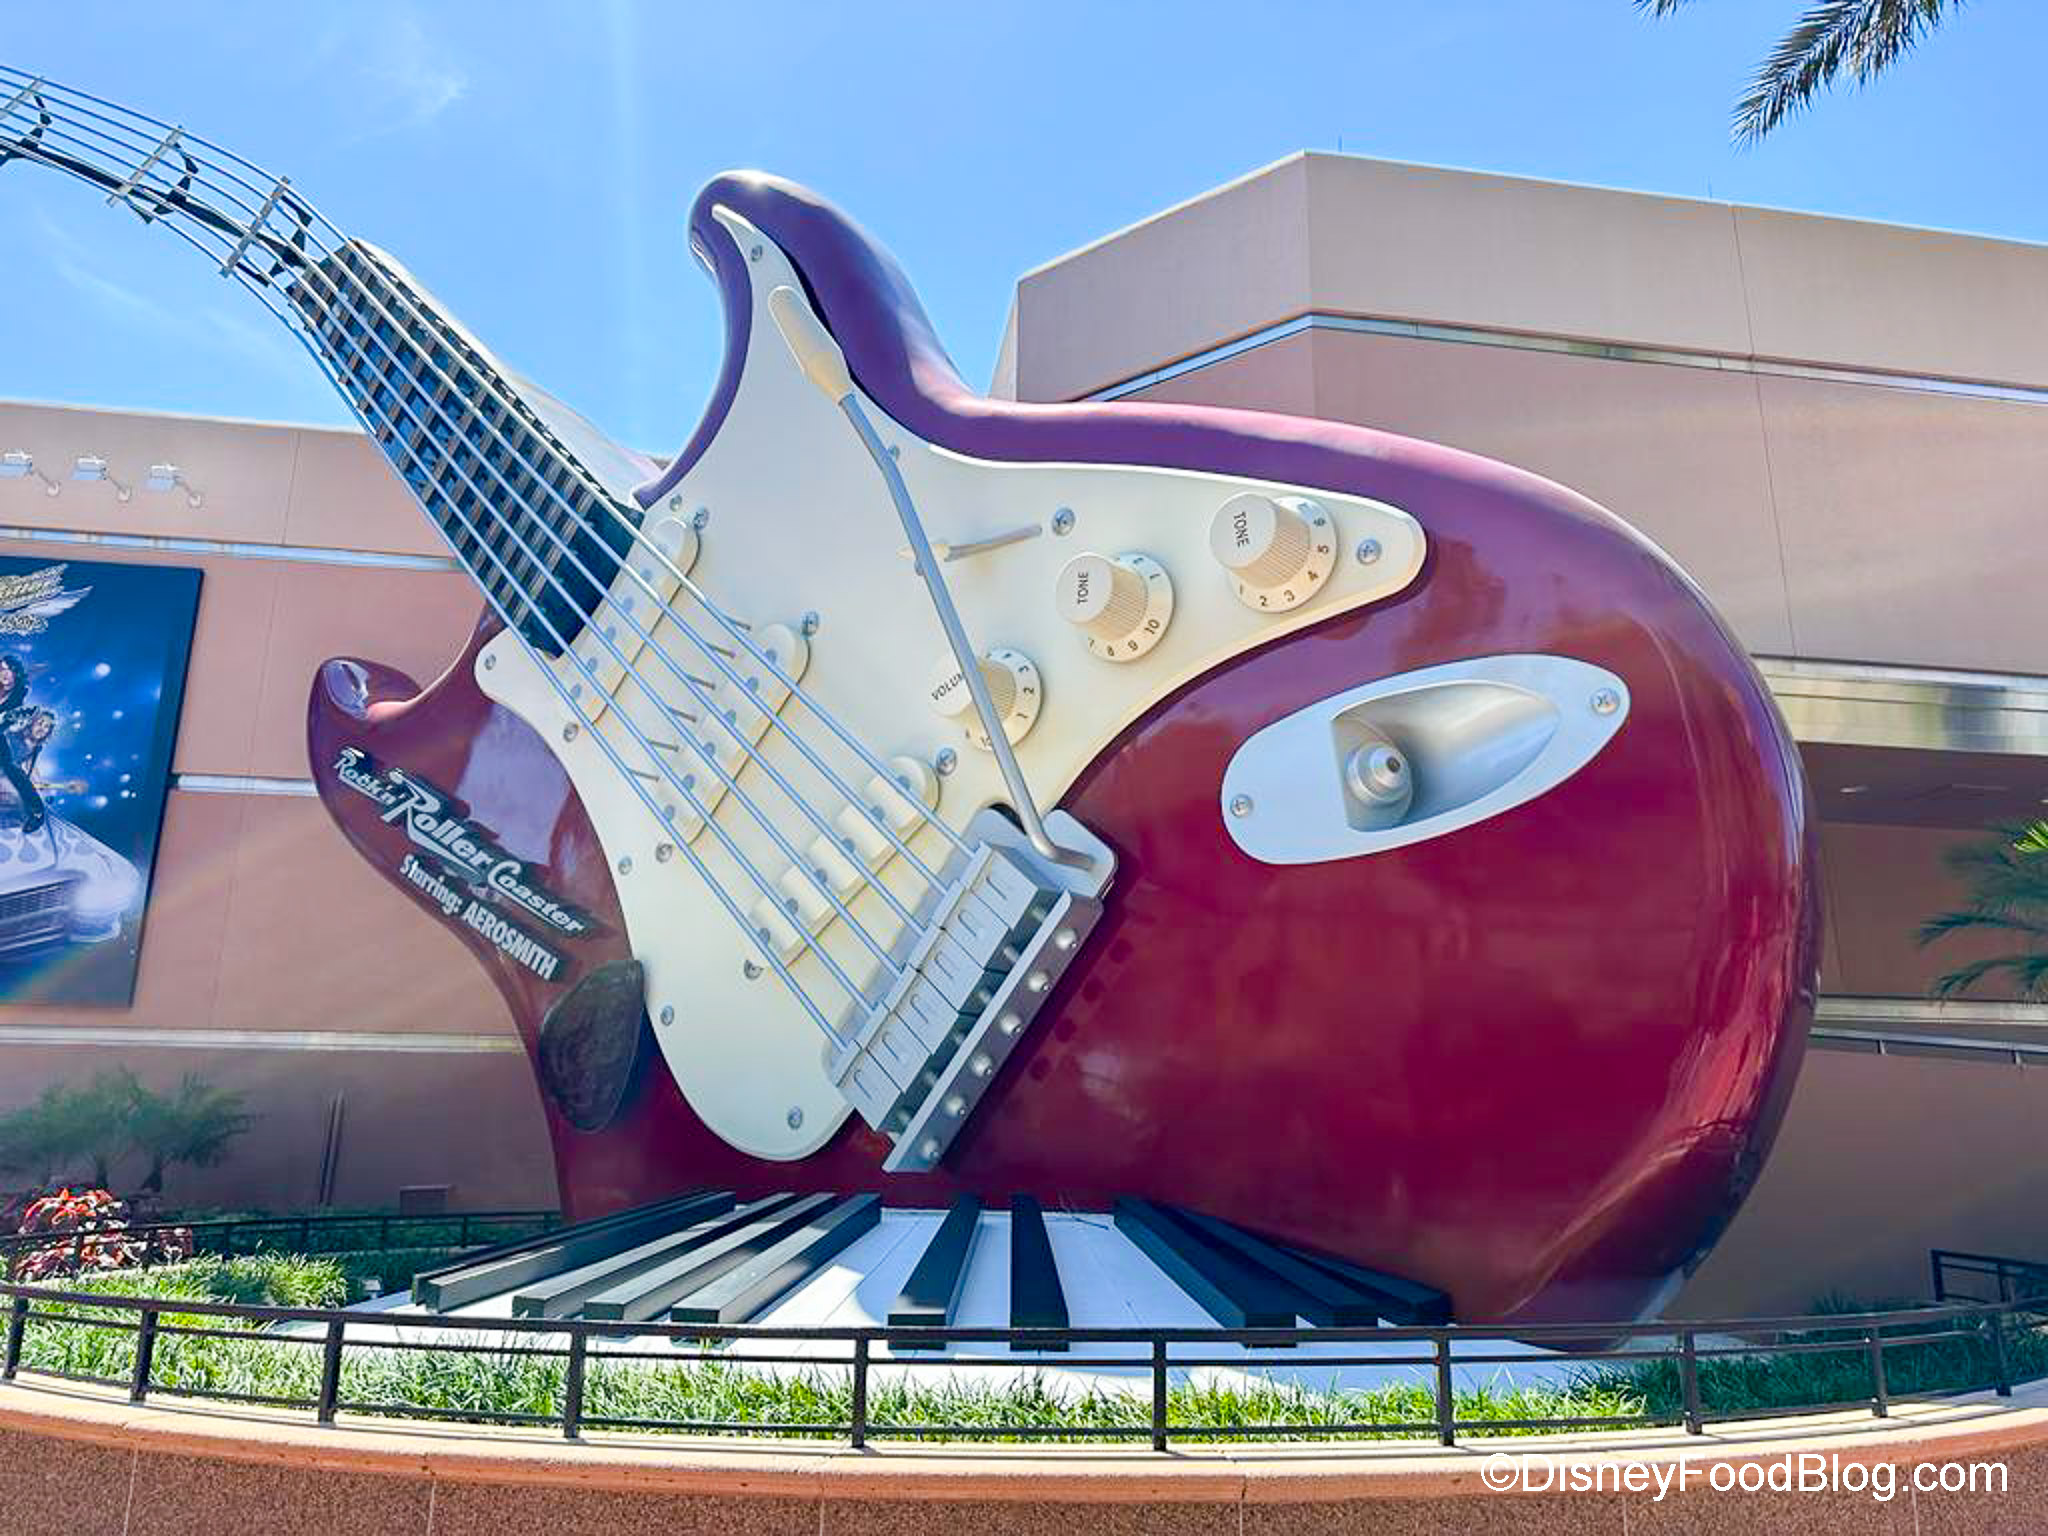 Walt Disney World's Rock 'n' Roller Coaster closes again for refurbishment  after briefly reopening over Memorial Day Weekend